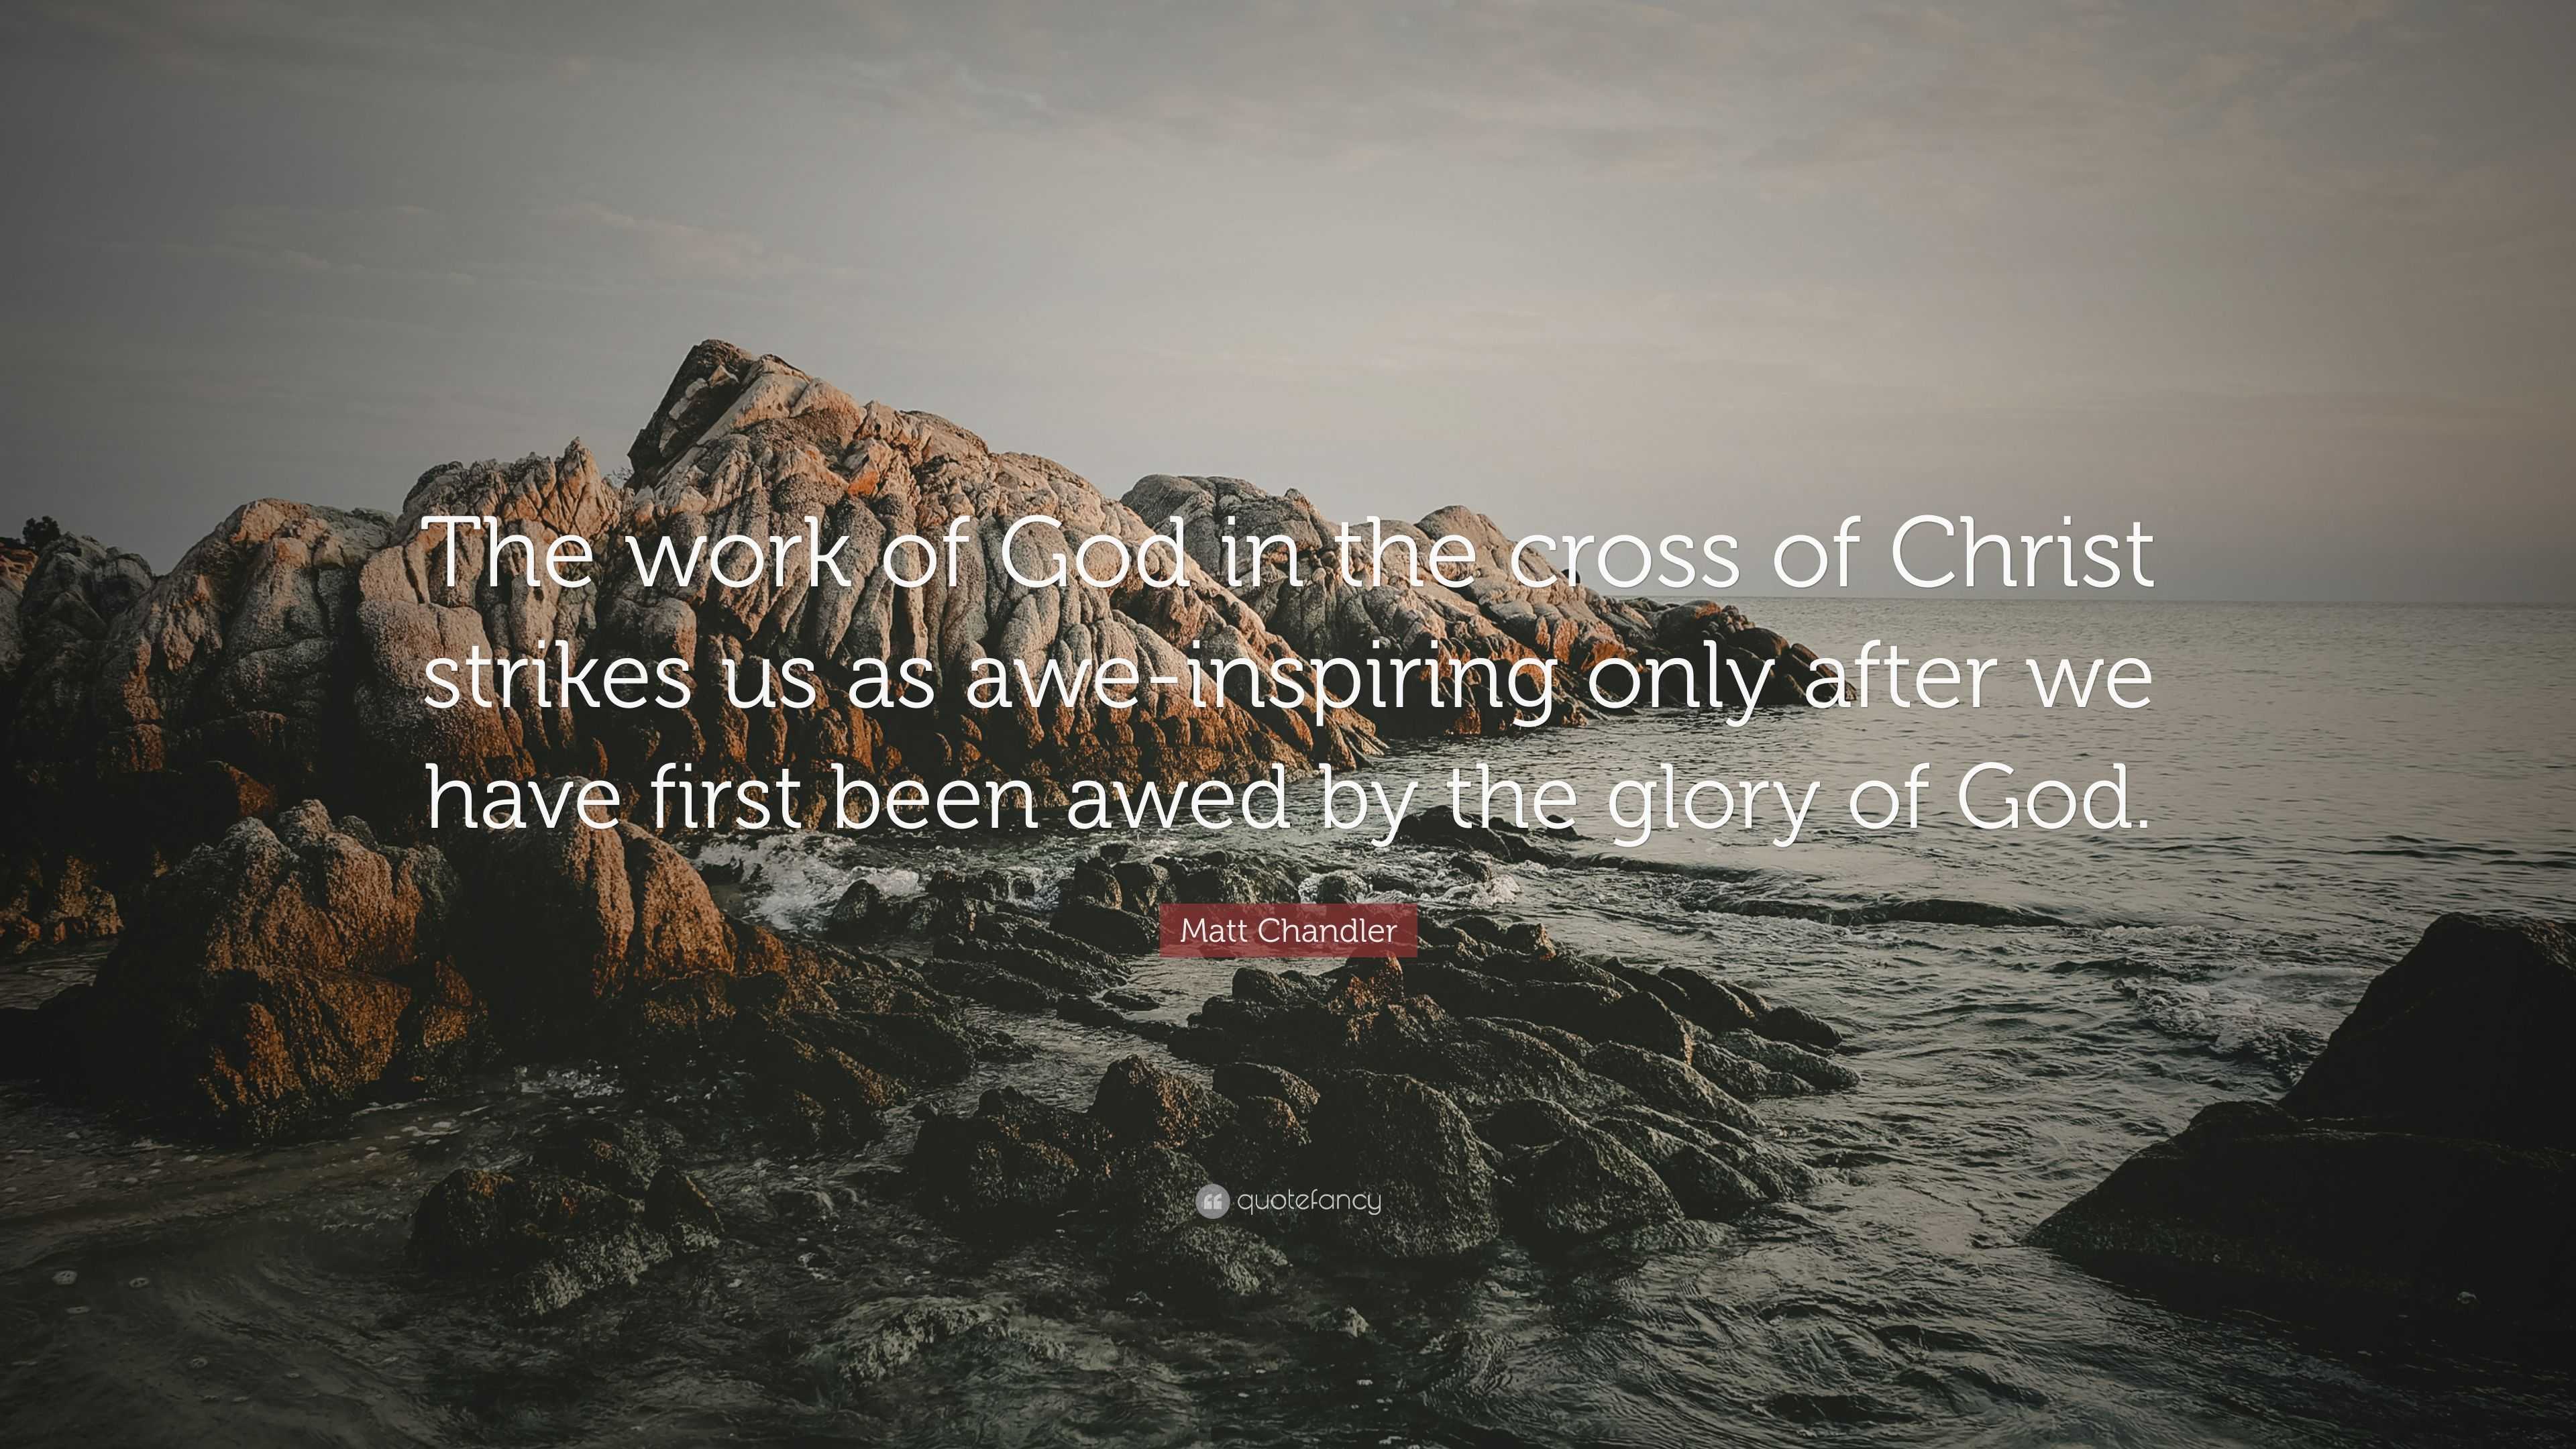 Matt Chandler Quote: “The work of God in the cross of Christ strikes us ...